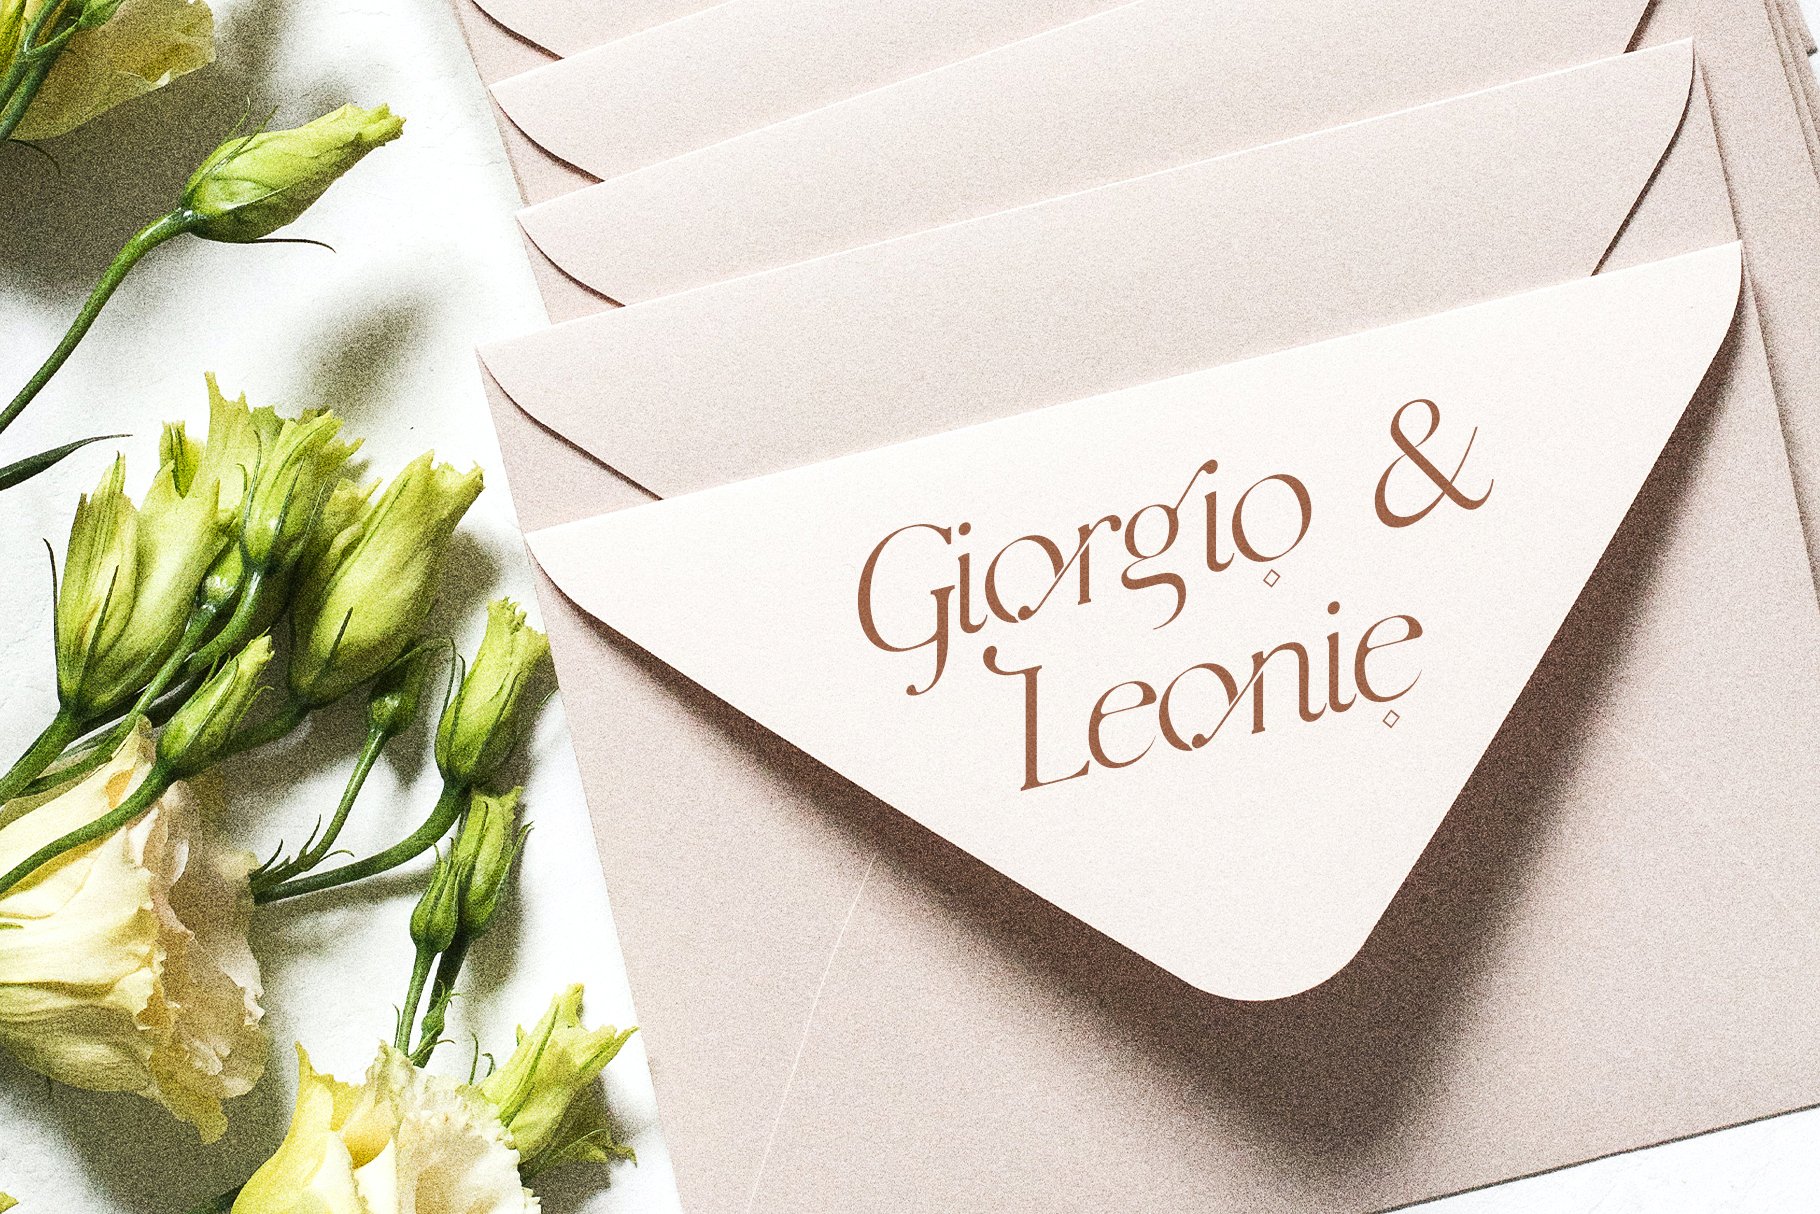 Perfect font for the wedding invitations.